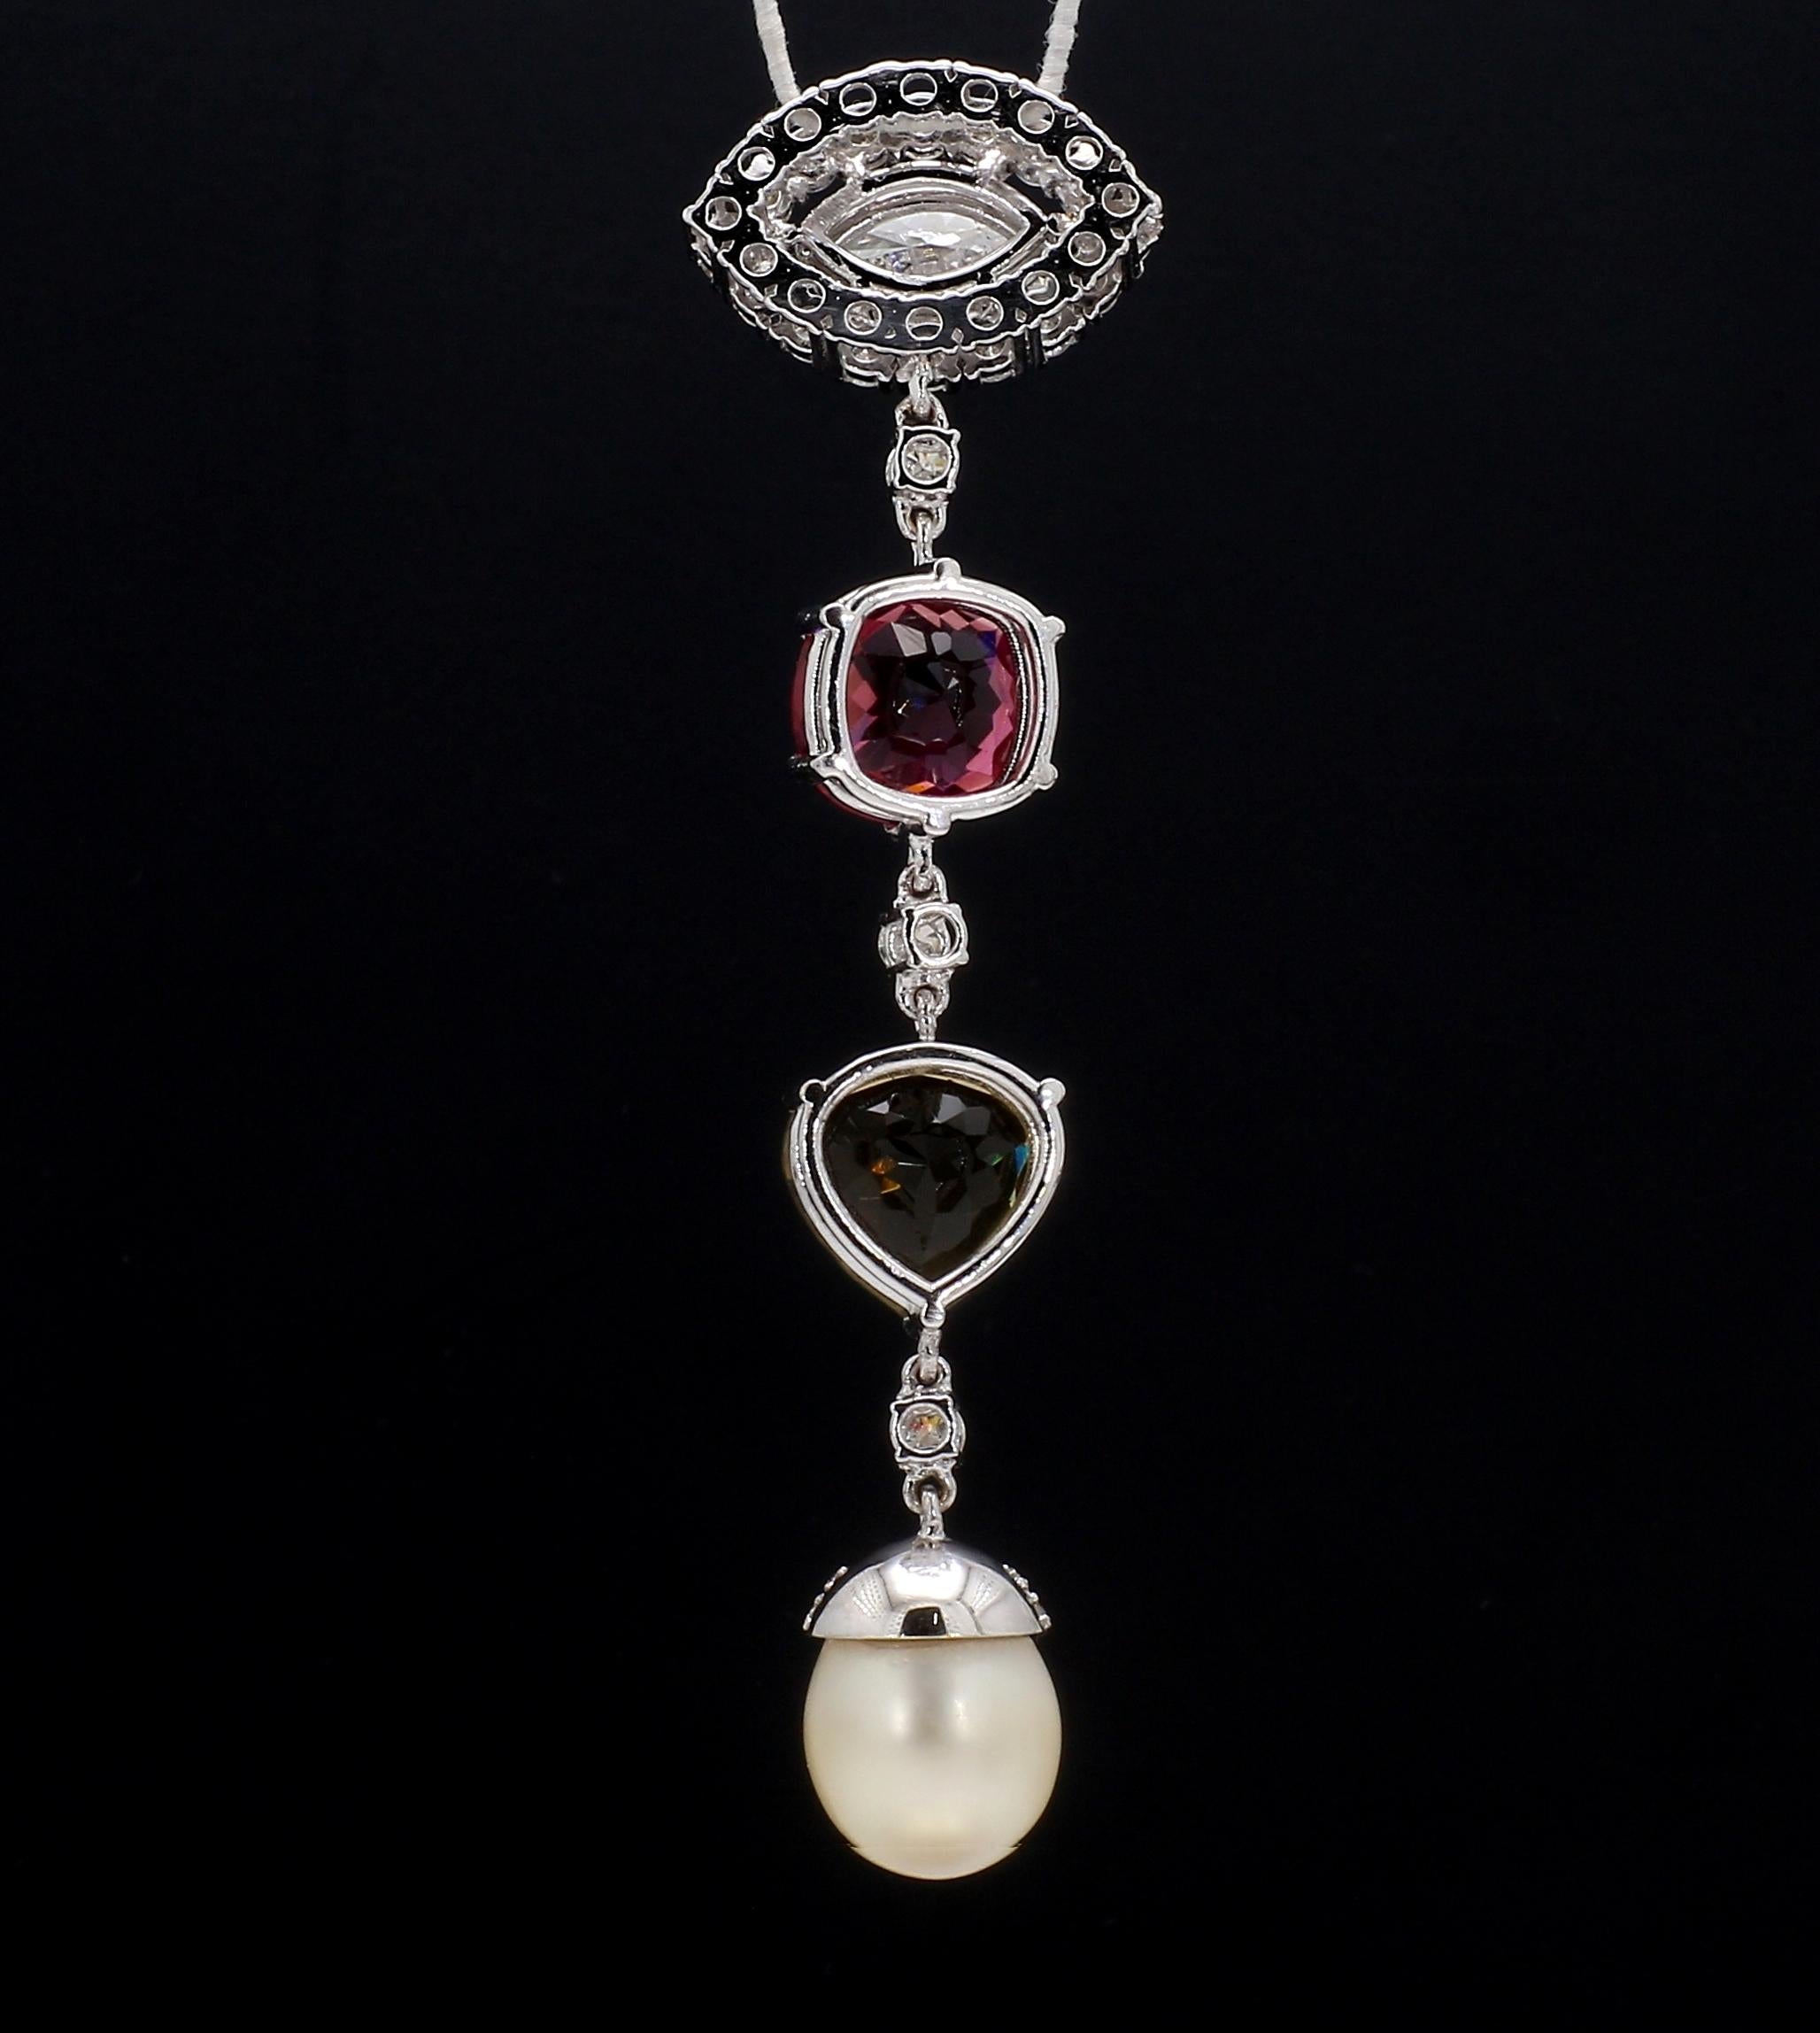 Anglo-Indian Marquise Diamond Drop Pendant with Tourmalines and South Sea Pearl